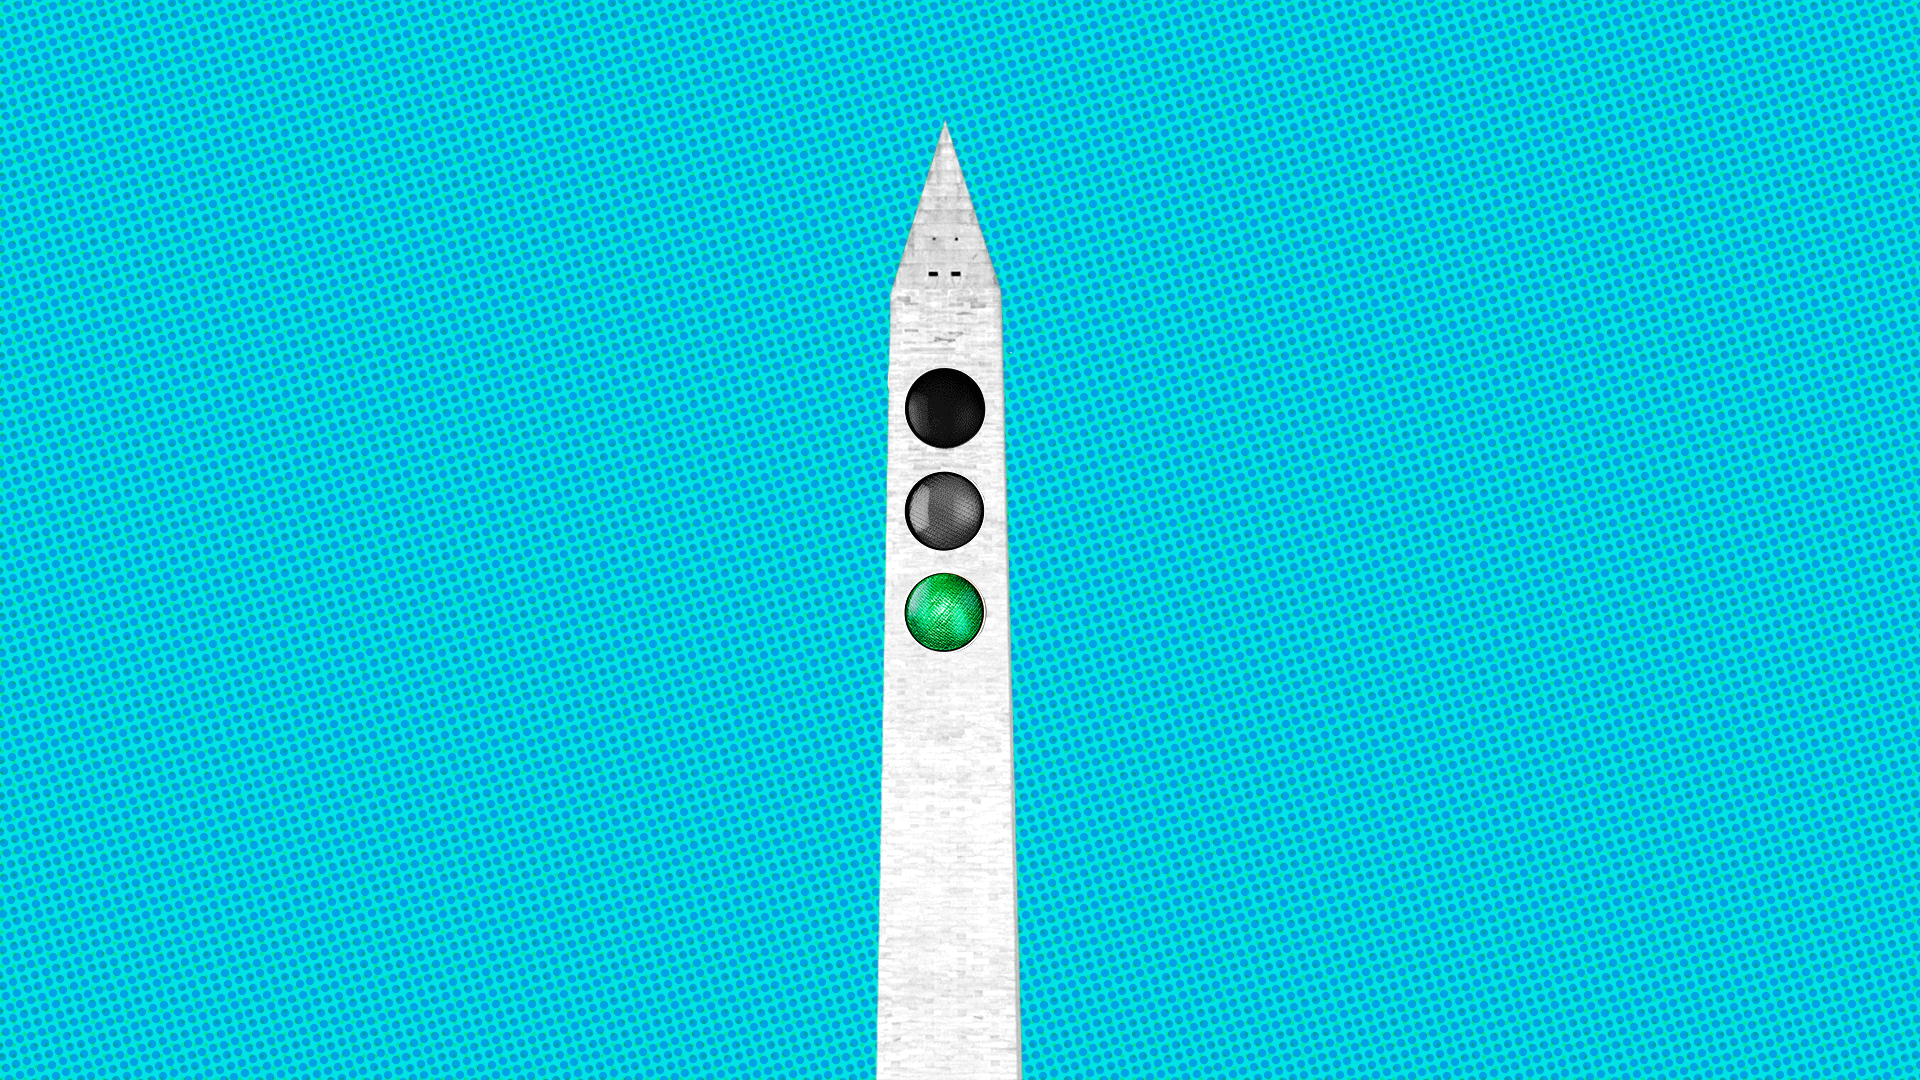 Animated illustration of the Washington Monument with a traffic signal embedded into the monument alternating between a green, yellow and red light. 